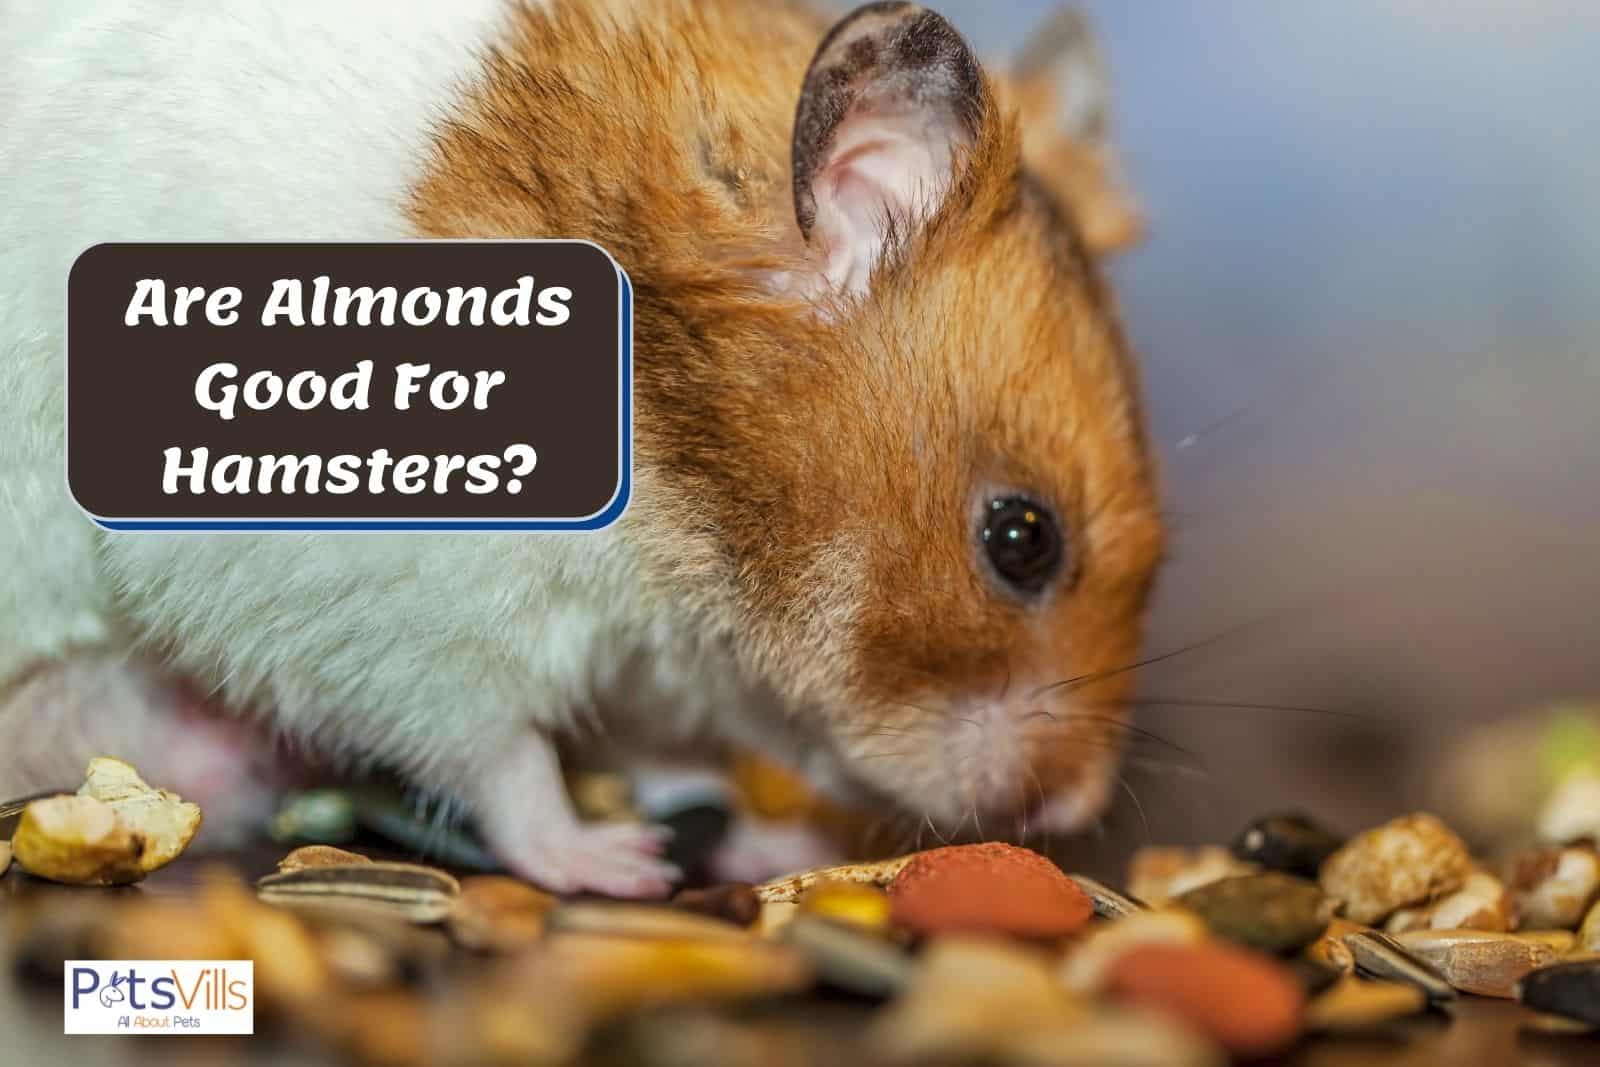 a hamster trying to eat almonds, can hamsters eat almonds